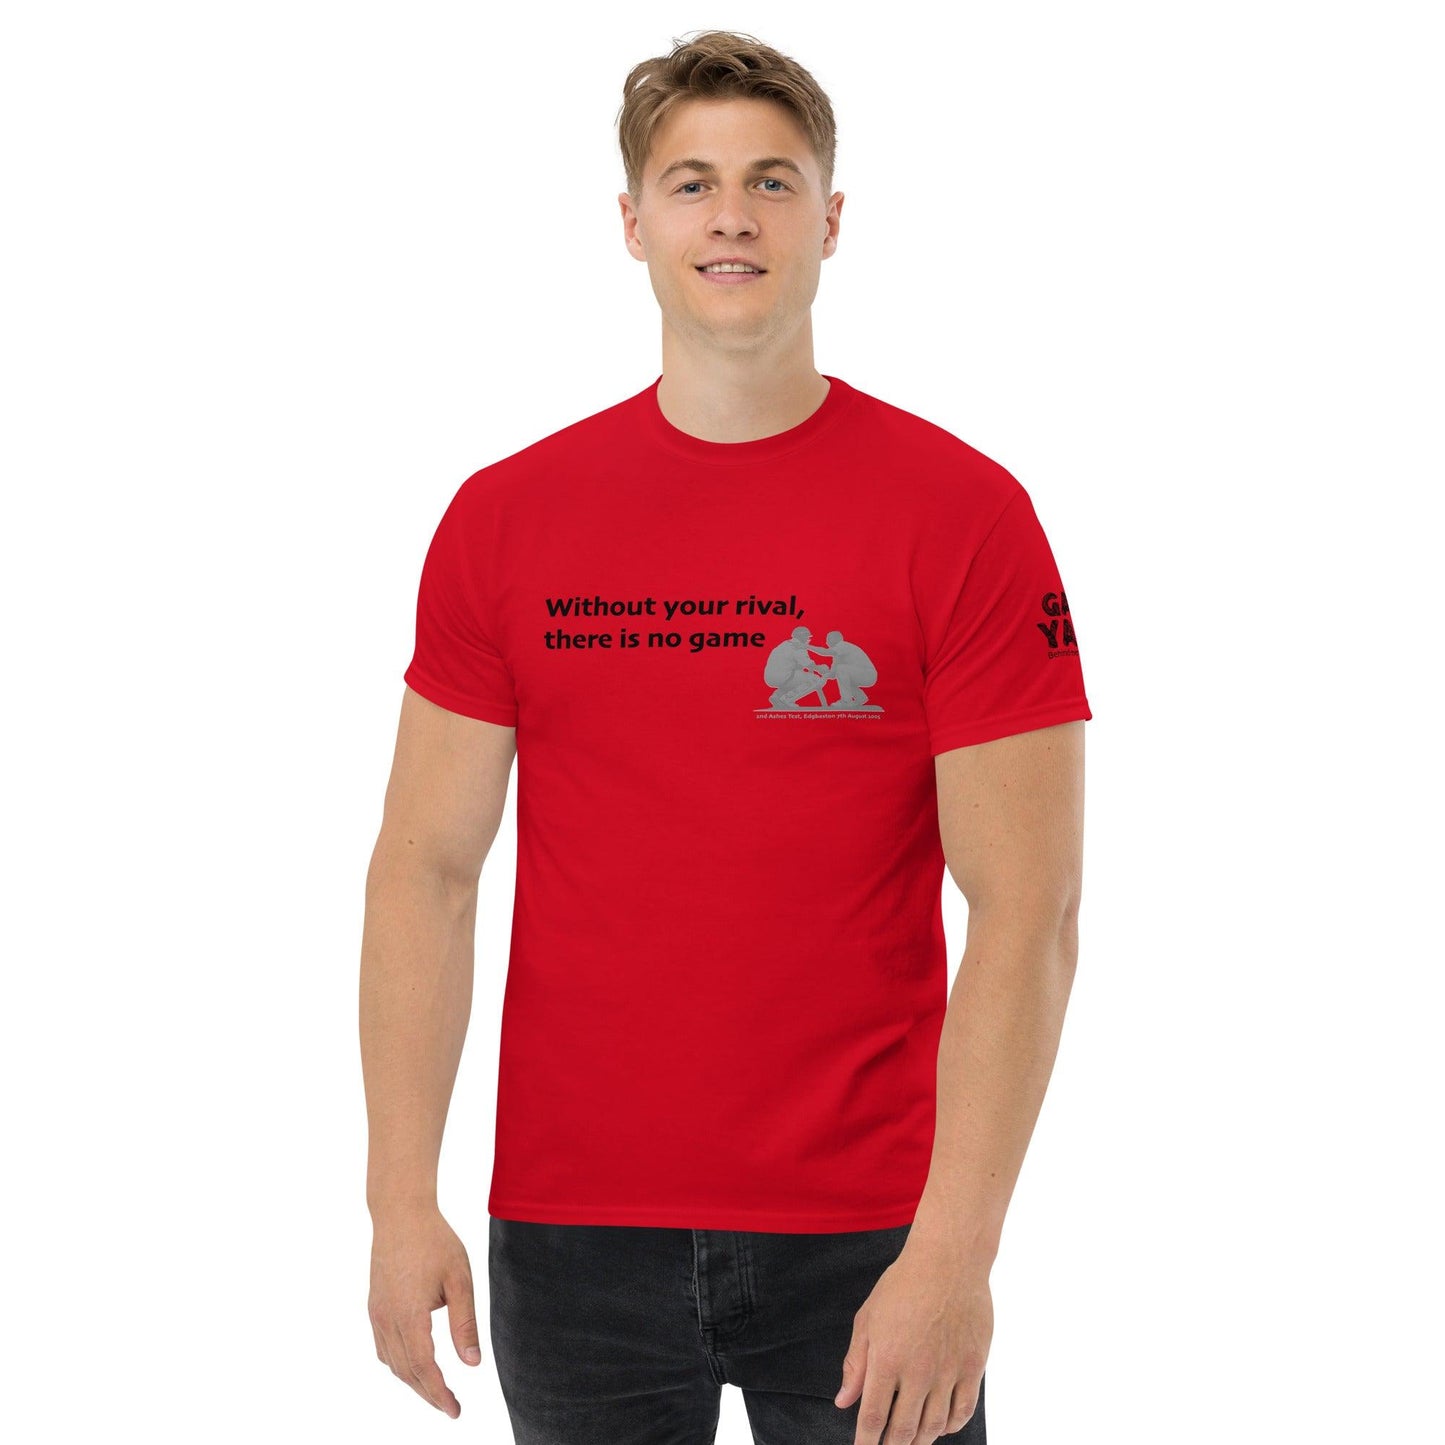 The Ashes Rivals & Respect t-shirt by Game Yarns